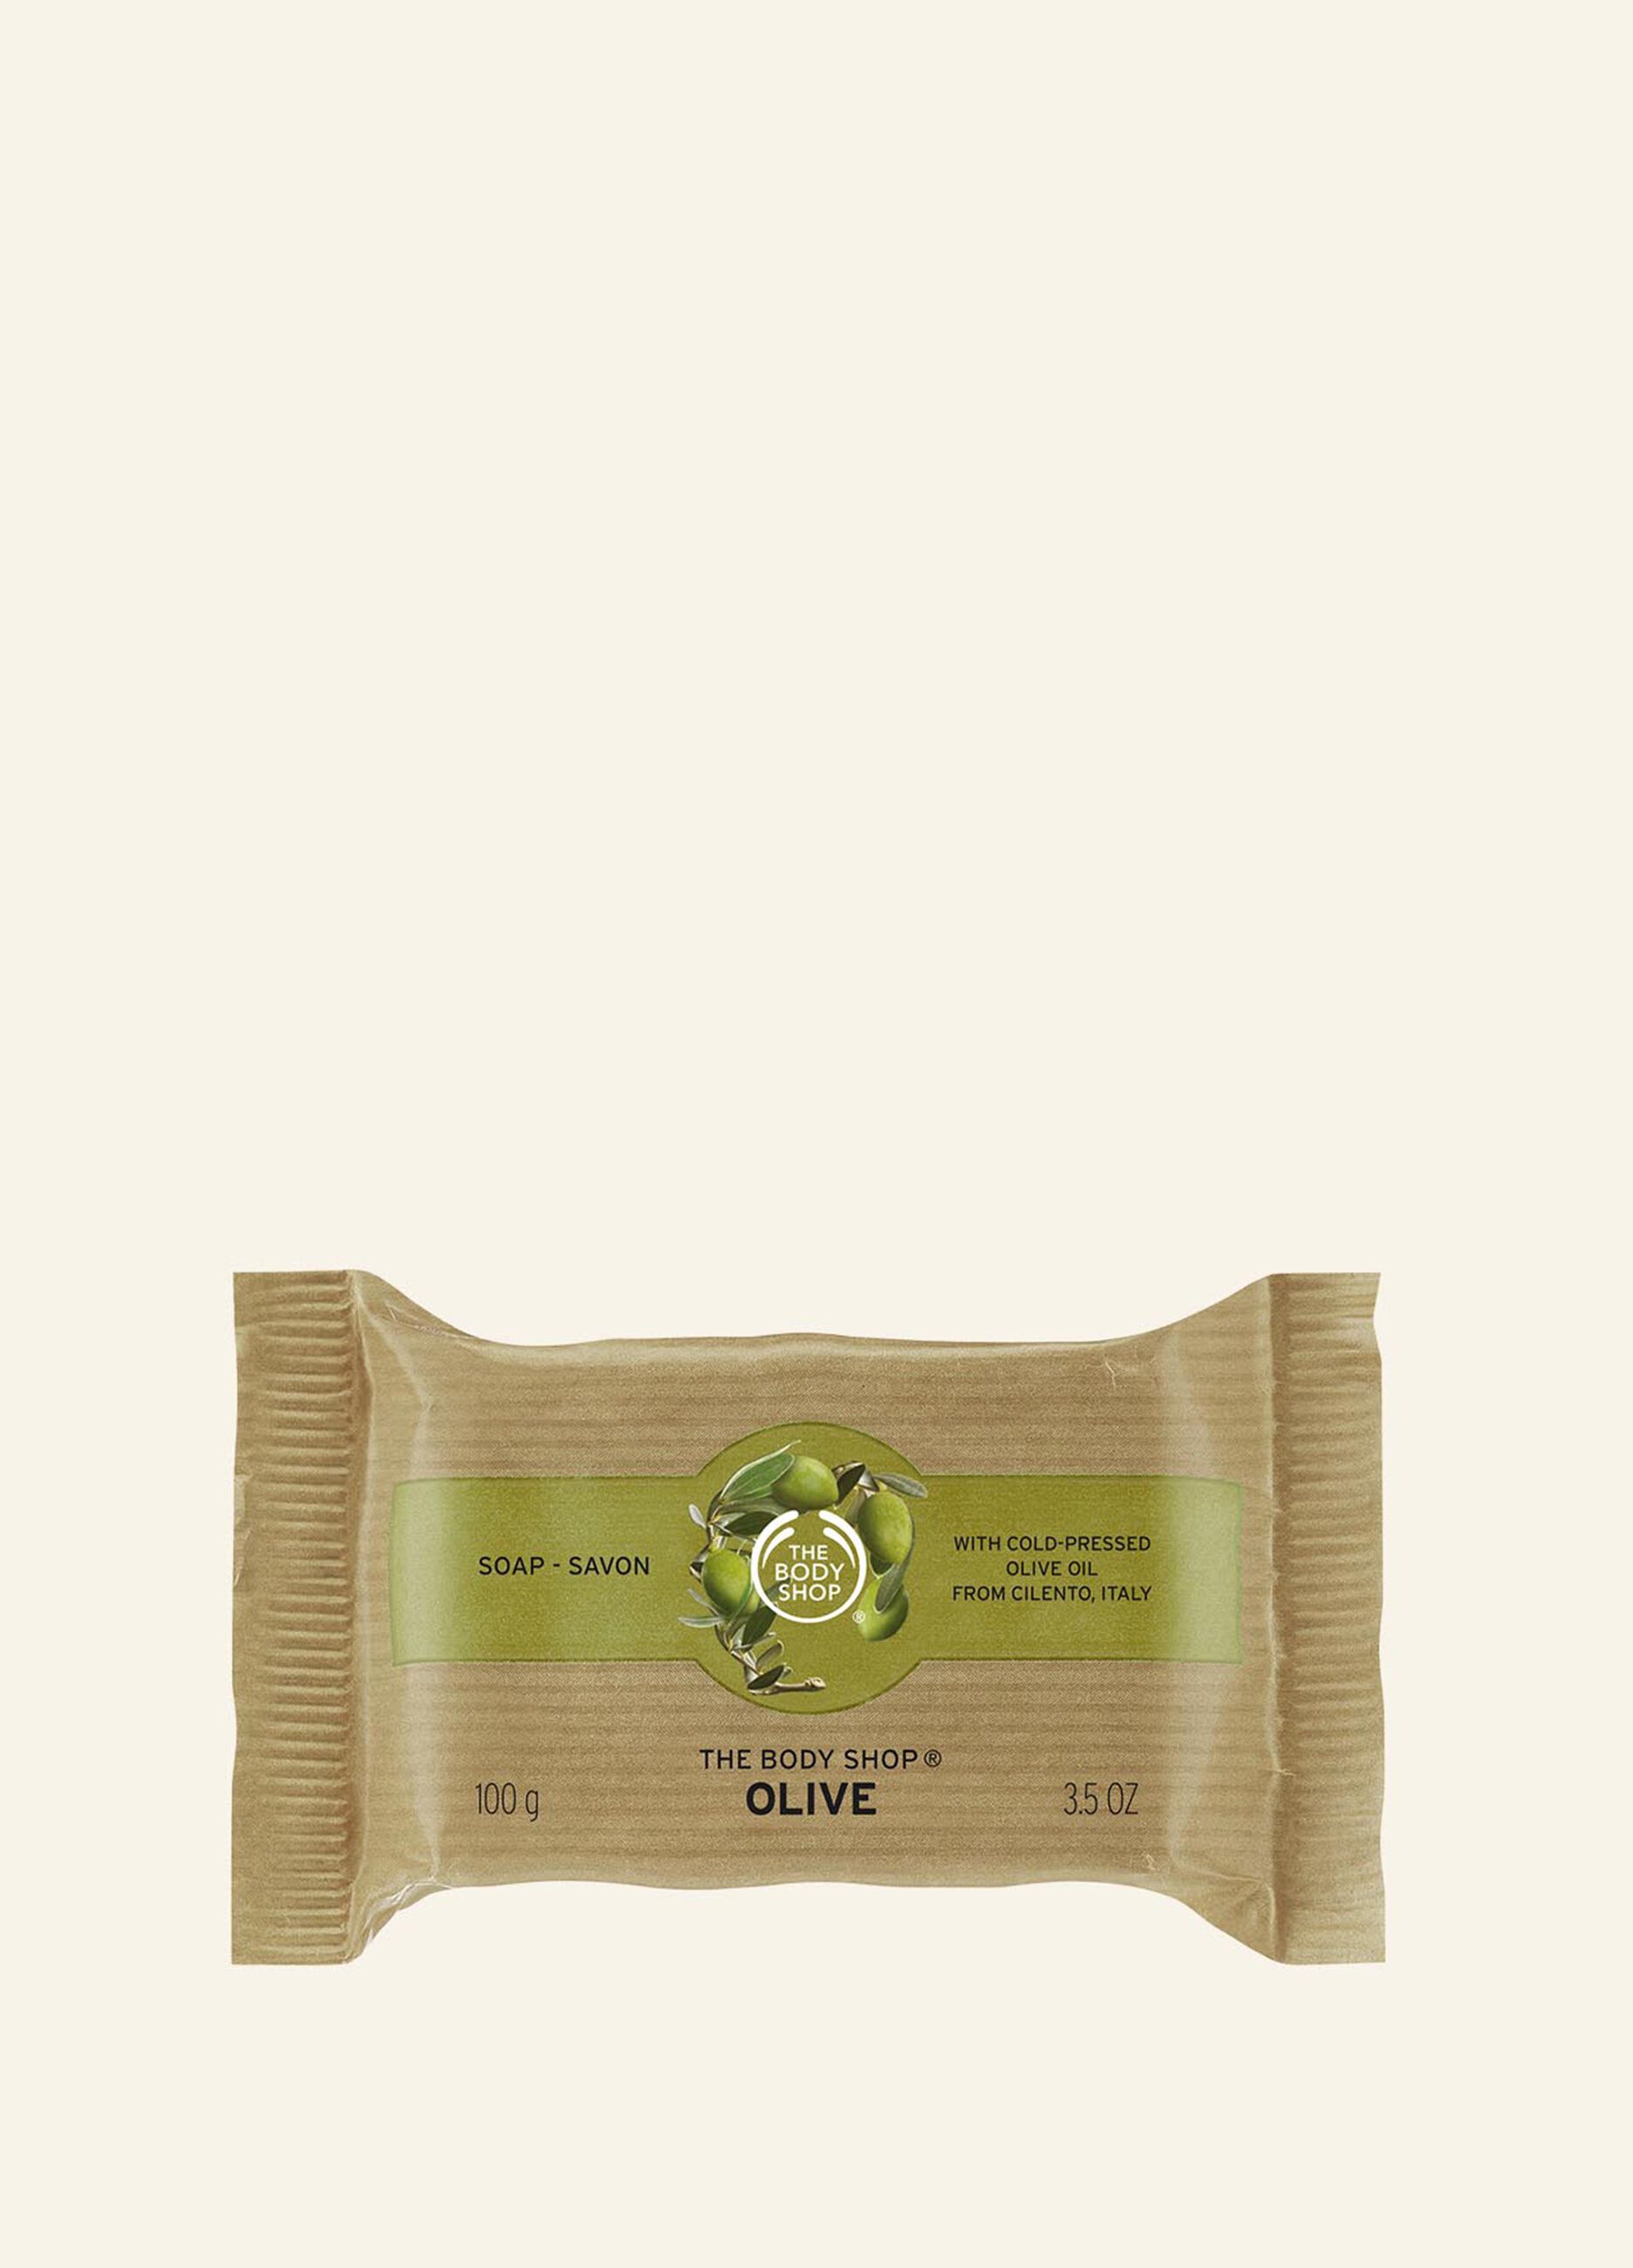 The Body Shop olive oil soap